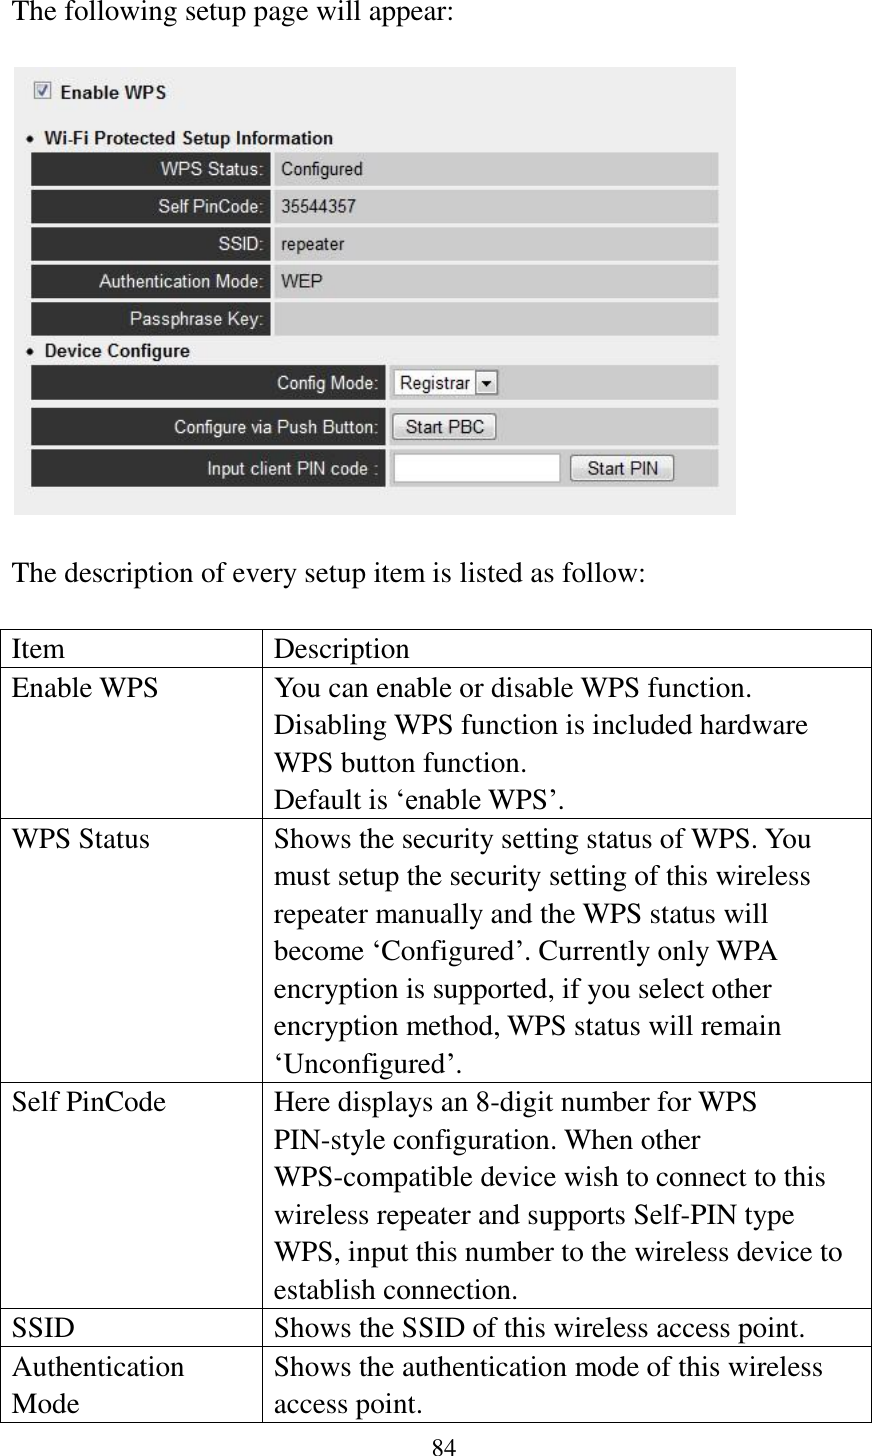 84  The following setup page will appear:    The description of every setup item is listed as follow:  Item Description Enable WPS You can enable or disable WPS function. Disabling WPS function is included hardware WPS button function.   Default is „enable WPS‟.   WPS Status Shows the security setting status of WPS. You must setup the security setting of this wireless repeater manually and the WPS status will become „Configured‟. Currently only WPA encryption is supported, if you select other encryption method, WPS status will remain „Unconfigured‟.  Self PinCode Here displays an 8-digit number for WPS PIN-style configuration. When other WPS-compatible device wish to connect to this wireless repeater and supports Self-PIN type WPS, input this number to the wireless device to establish connection. SSID Shows the SSID of this wireless access point. Authentication Mode Shows the authentication mode of this wireless access point. 